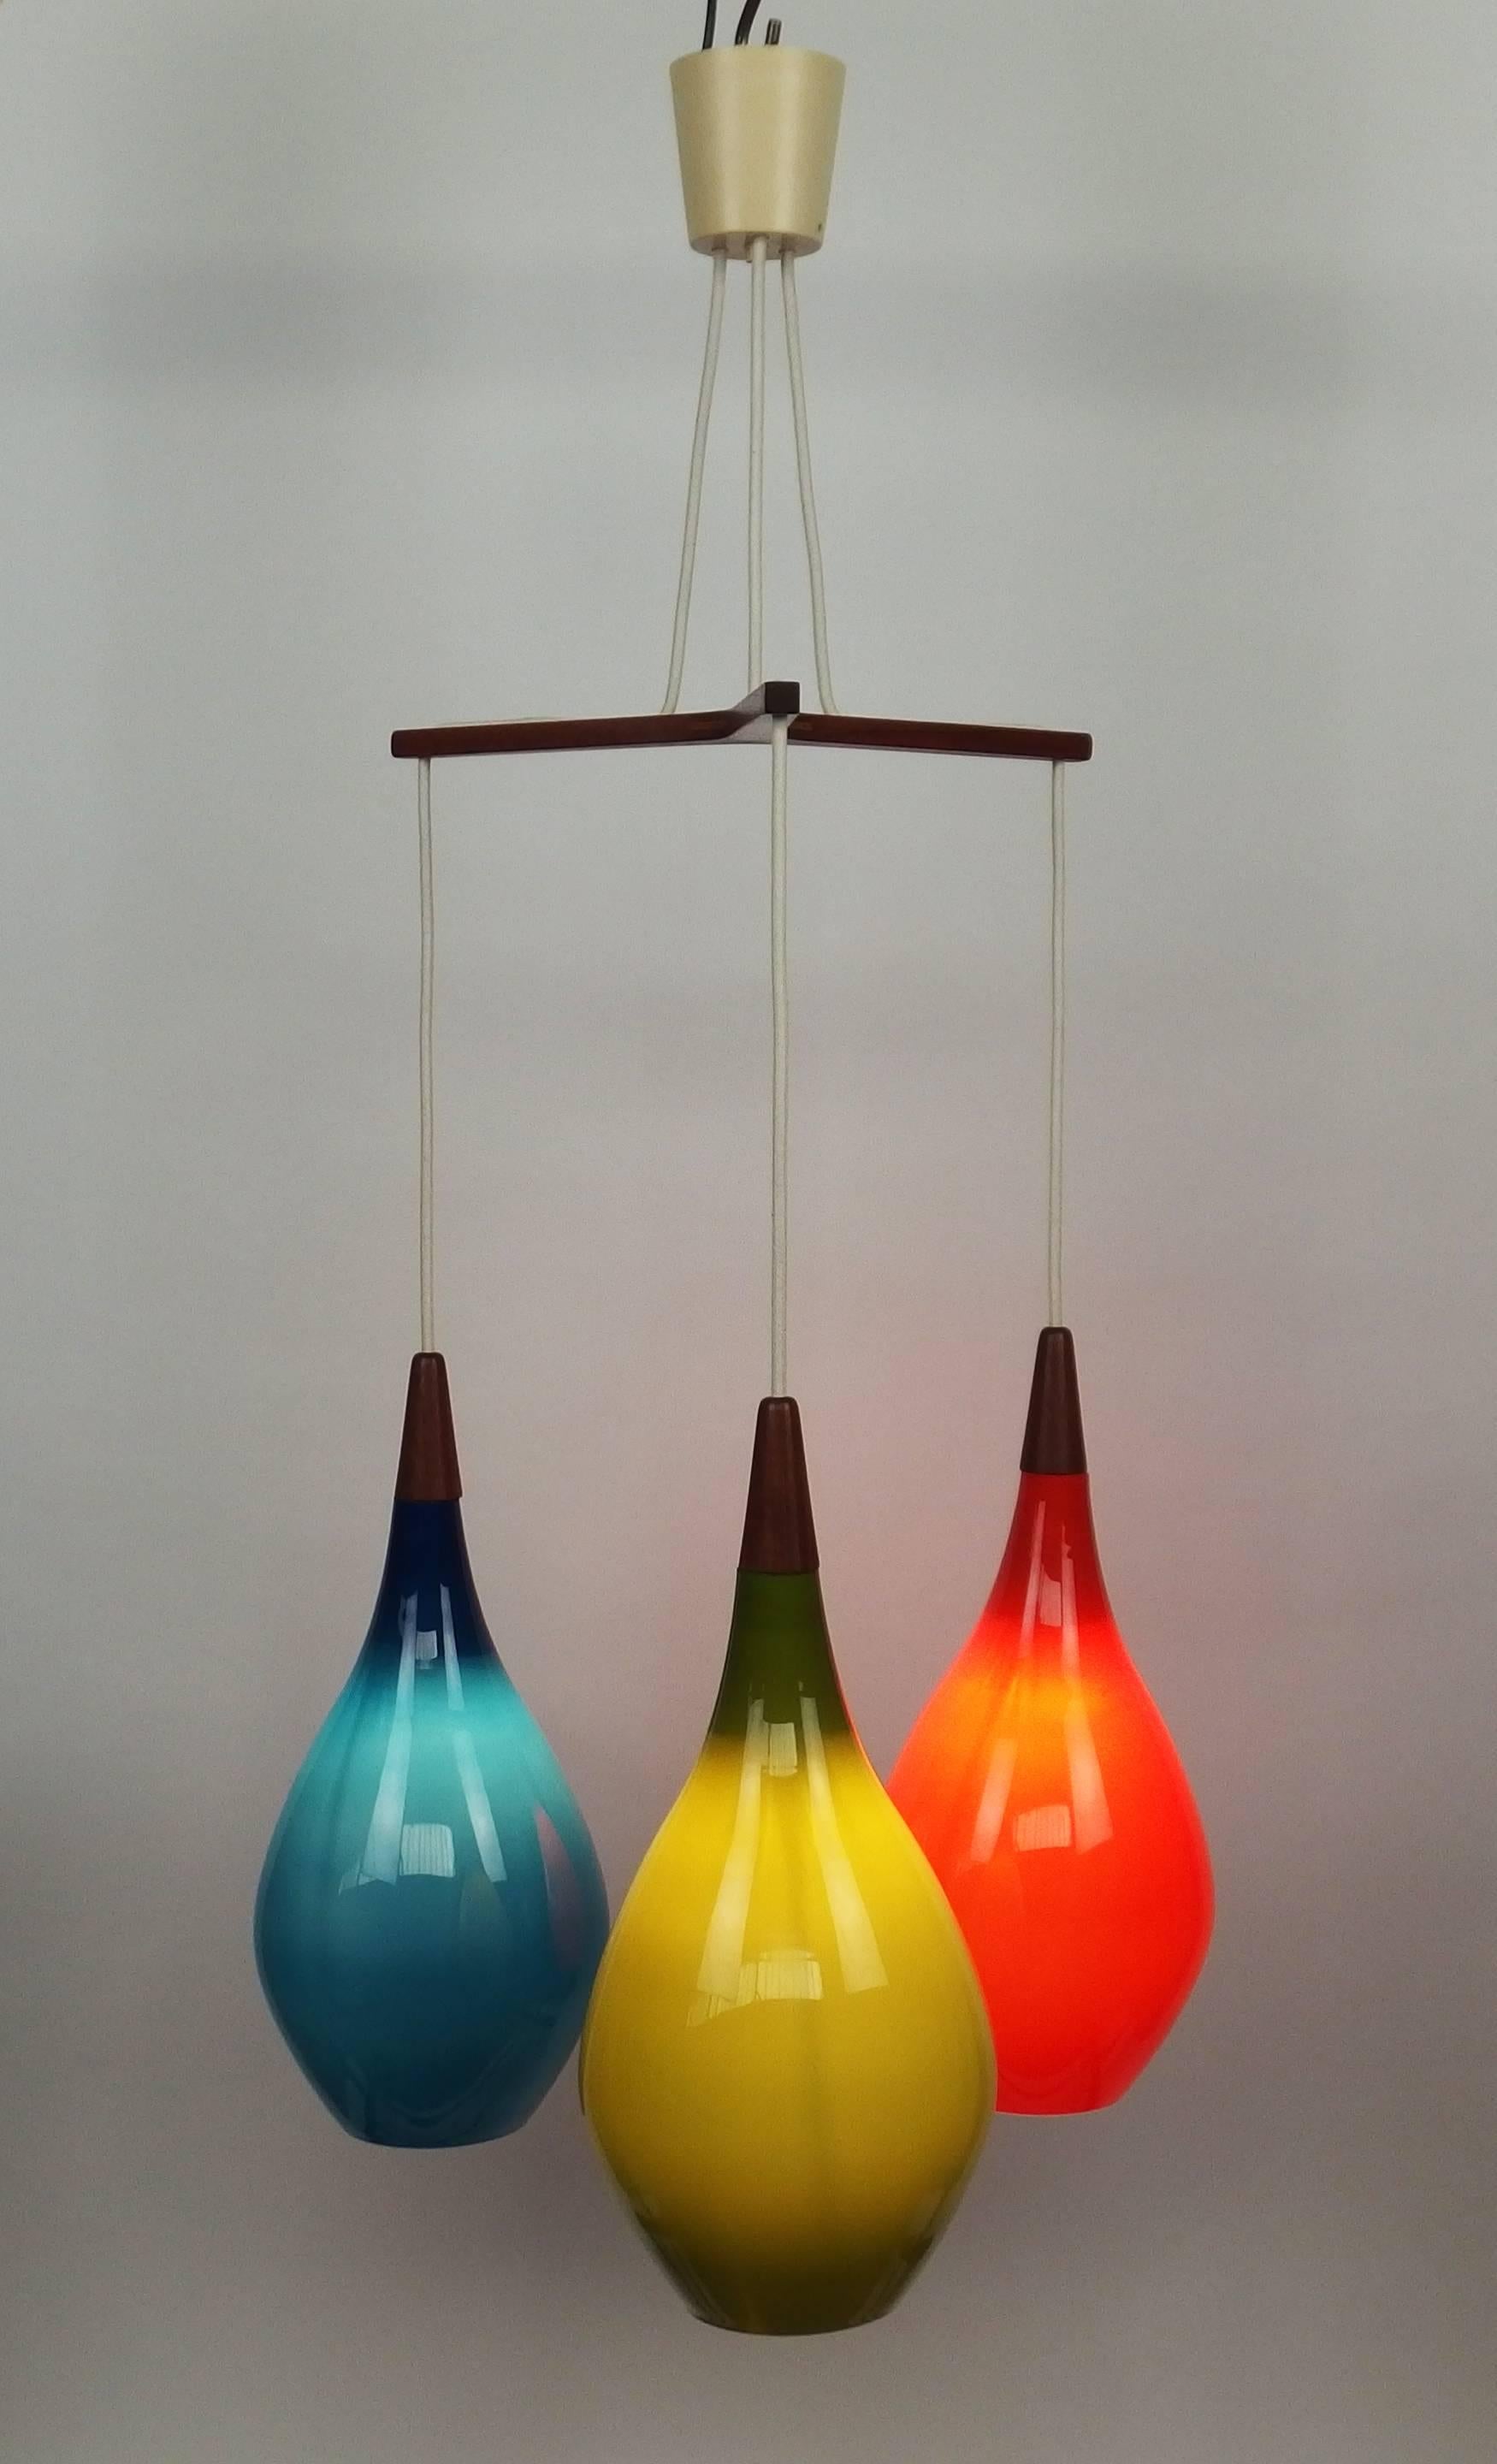 A Danish colorful Holmegaard chandelier with" tear drop" glass globes hung on a teak stand. The height of each globe is adjustable.
This chandelier is rewired with the original screw sockets.
globes dimensions: diameter 8 in, height